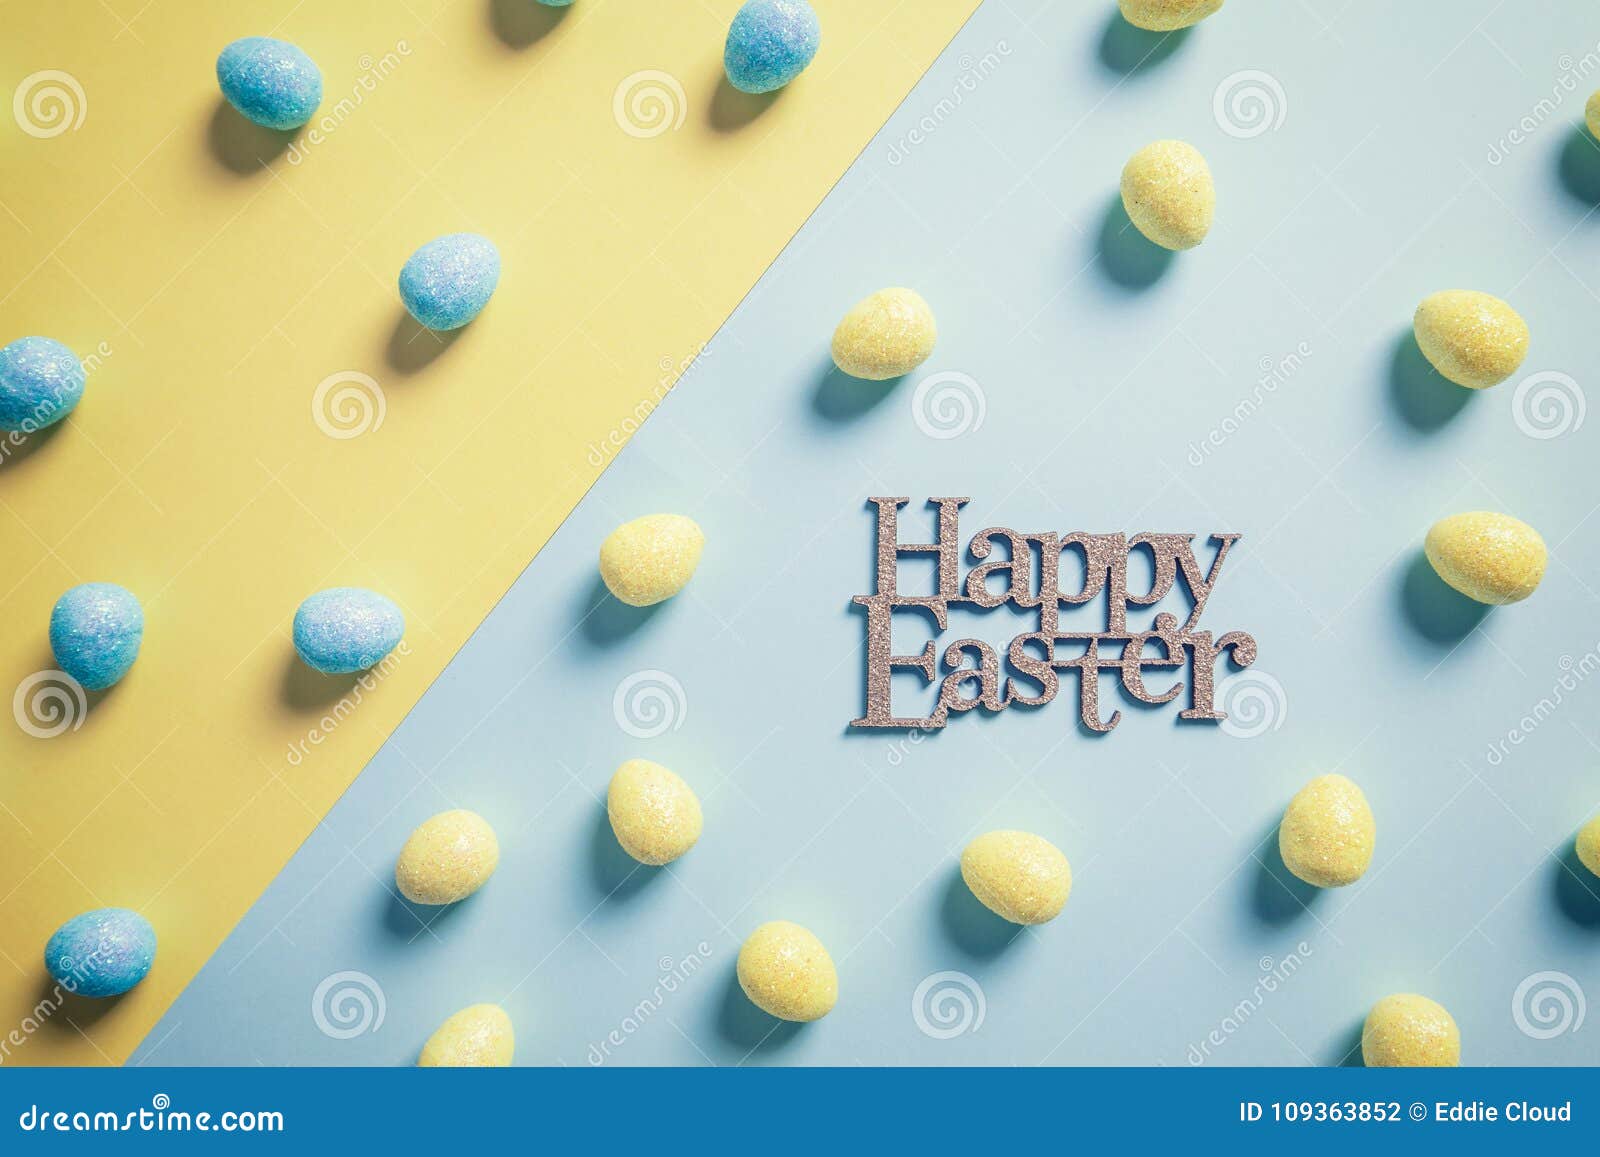 Happy Easter Pastel Yellow and Blue Design Stock Photo - Image of ...